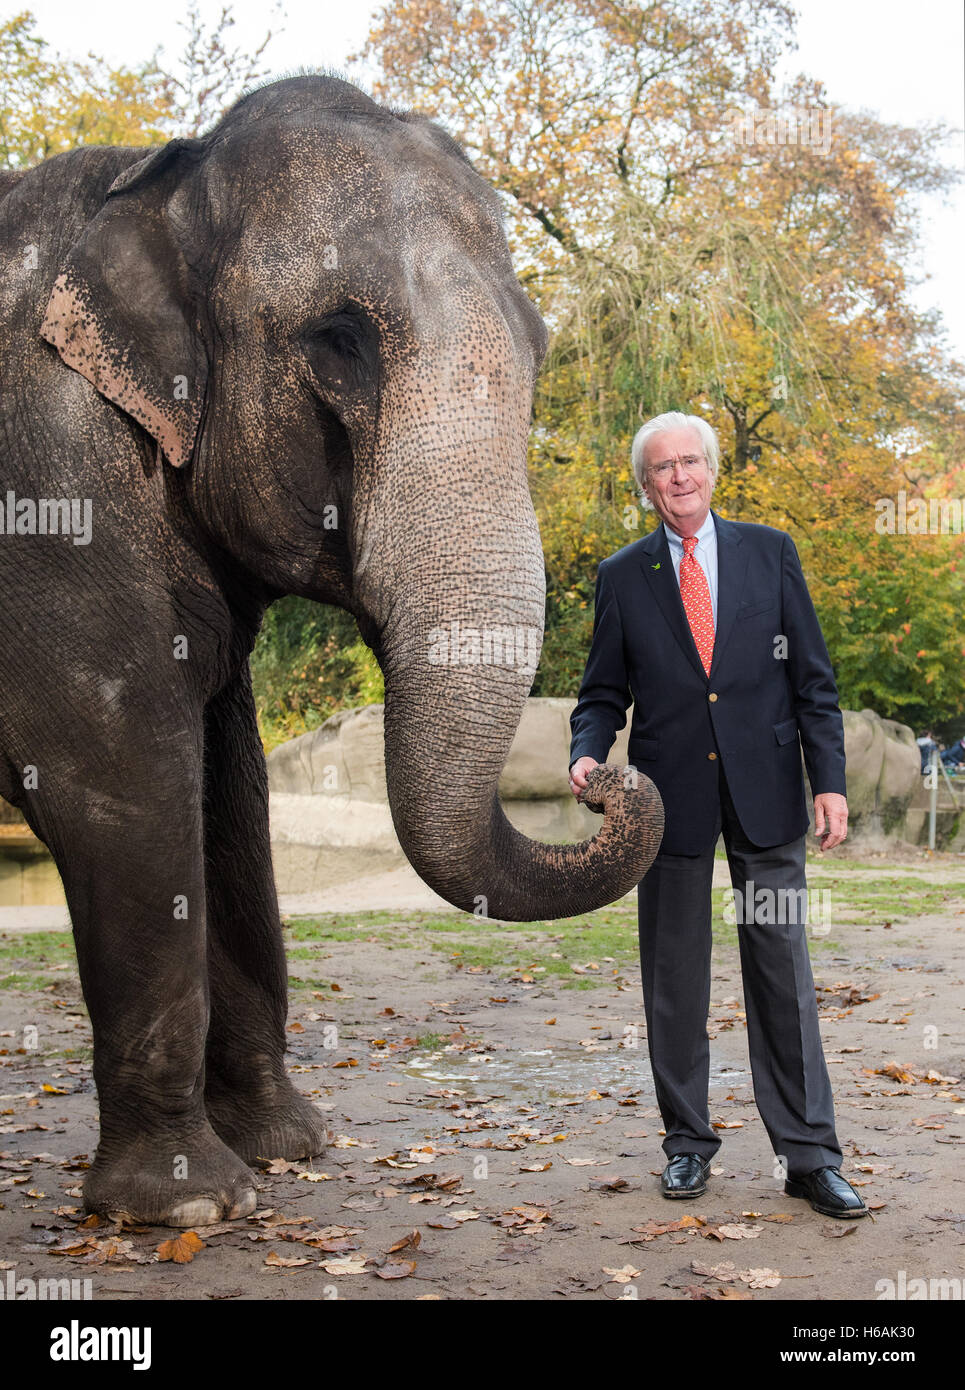 Hamburg, Germany. 26th Oct, 2016. The great-grandson of the founder of the zoo in Hamburg-Stellingen, today called Hagenbecks Tierpark, Carl Claus Hagenbeck, smiles next to elephant Shandra in Hagenbecks Tierpark in Hamburg, Germany, 26 October 2016. On 01 November 2016 Hagenbeck is celebrating his 75th birthday. Photo: DANIEL BOCKWOLDT/dpa/Alamy Live News Stock Photo